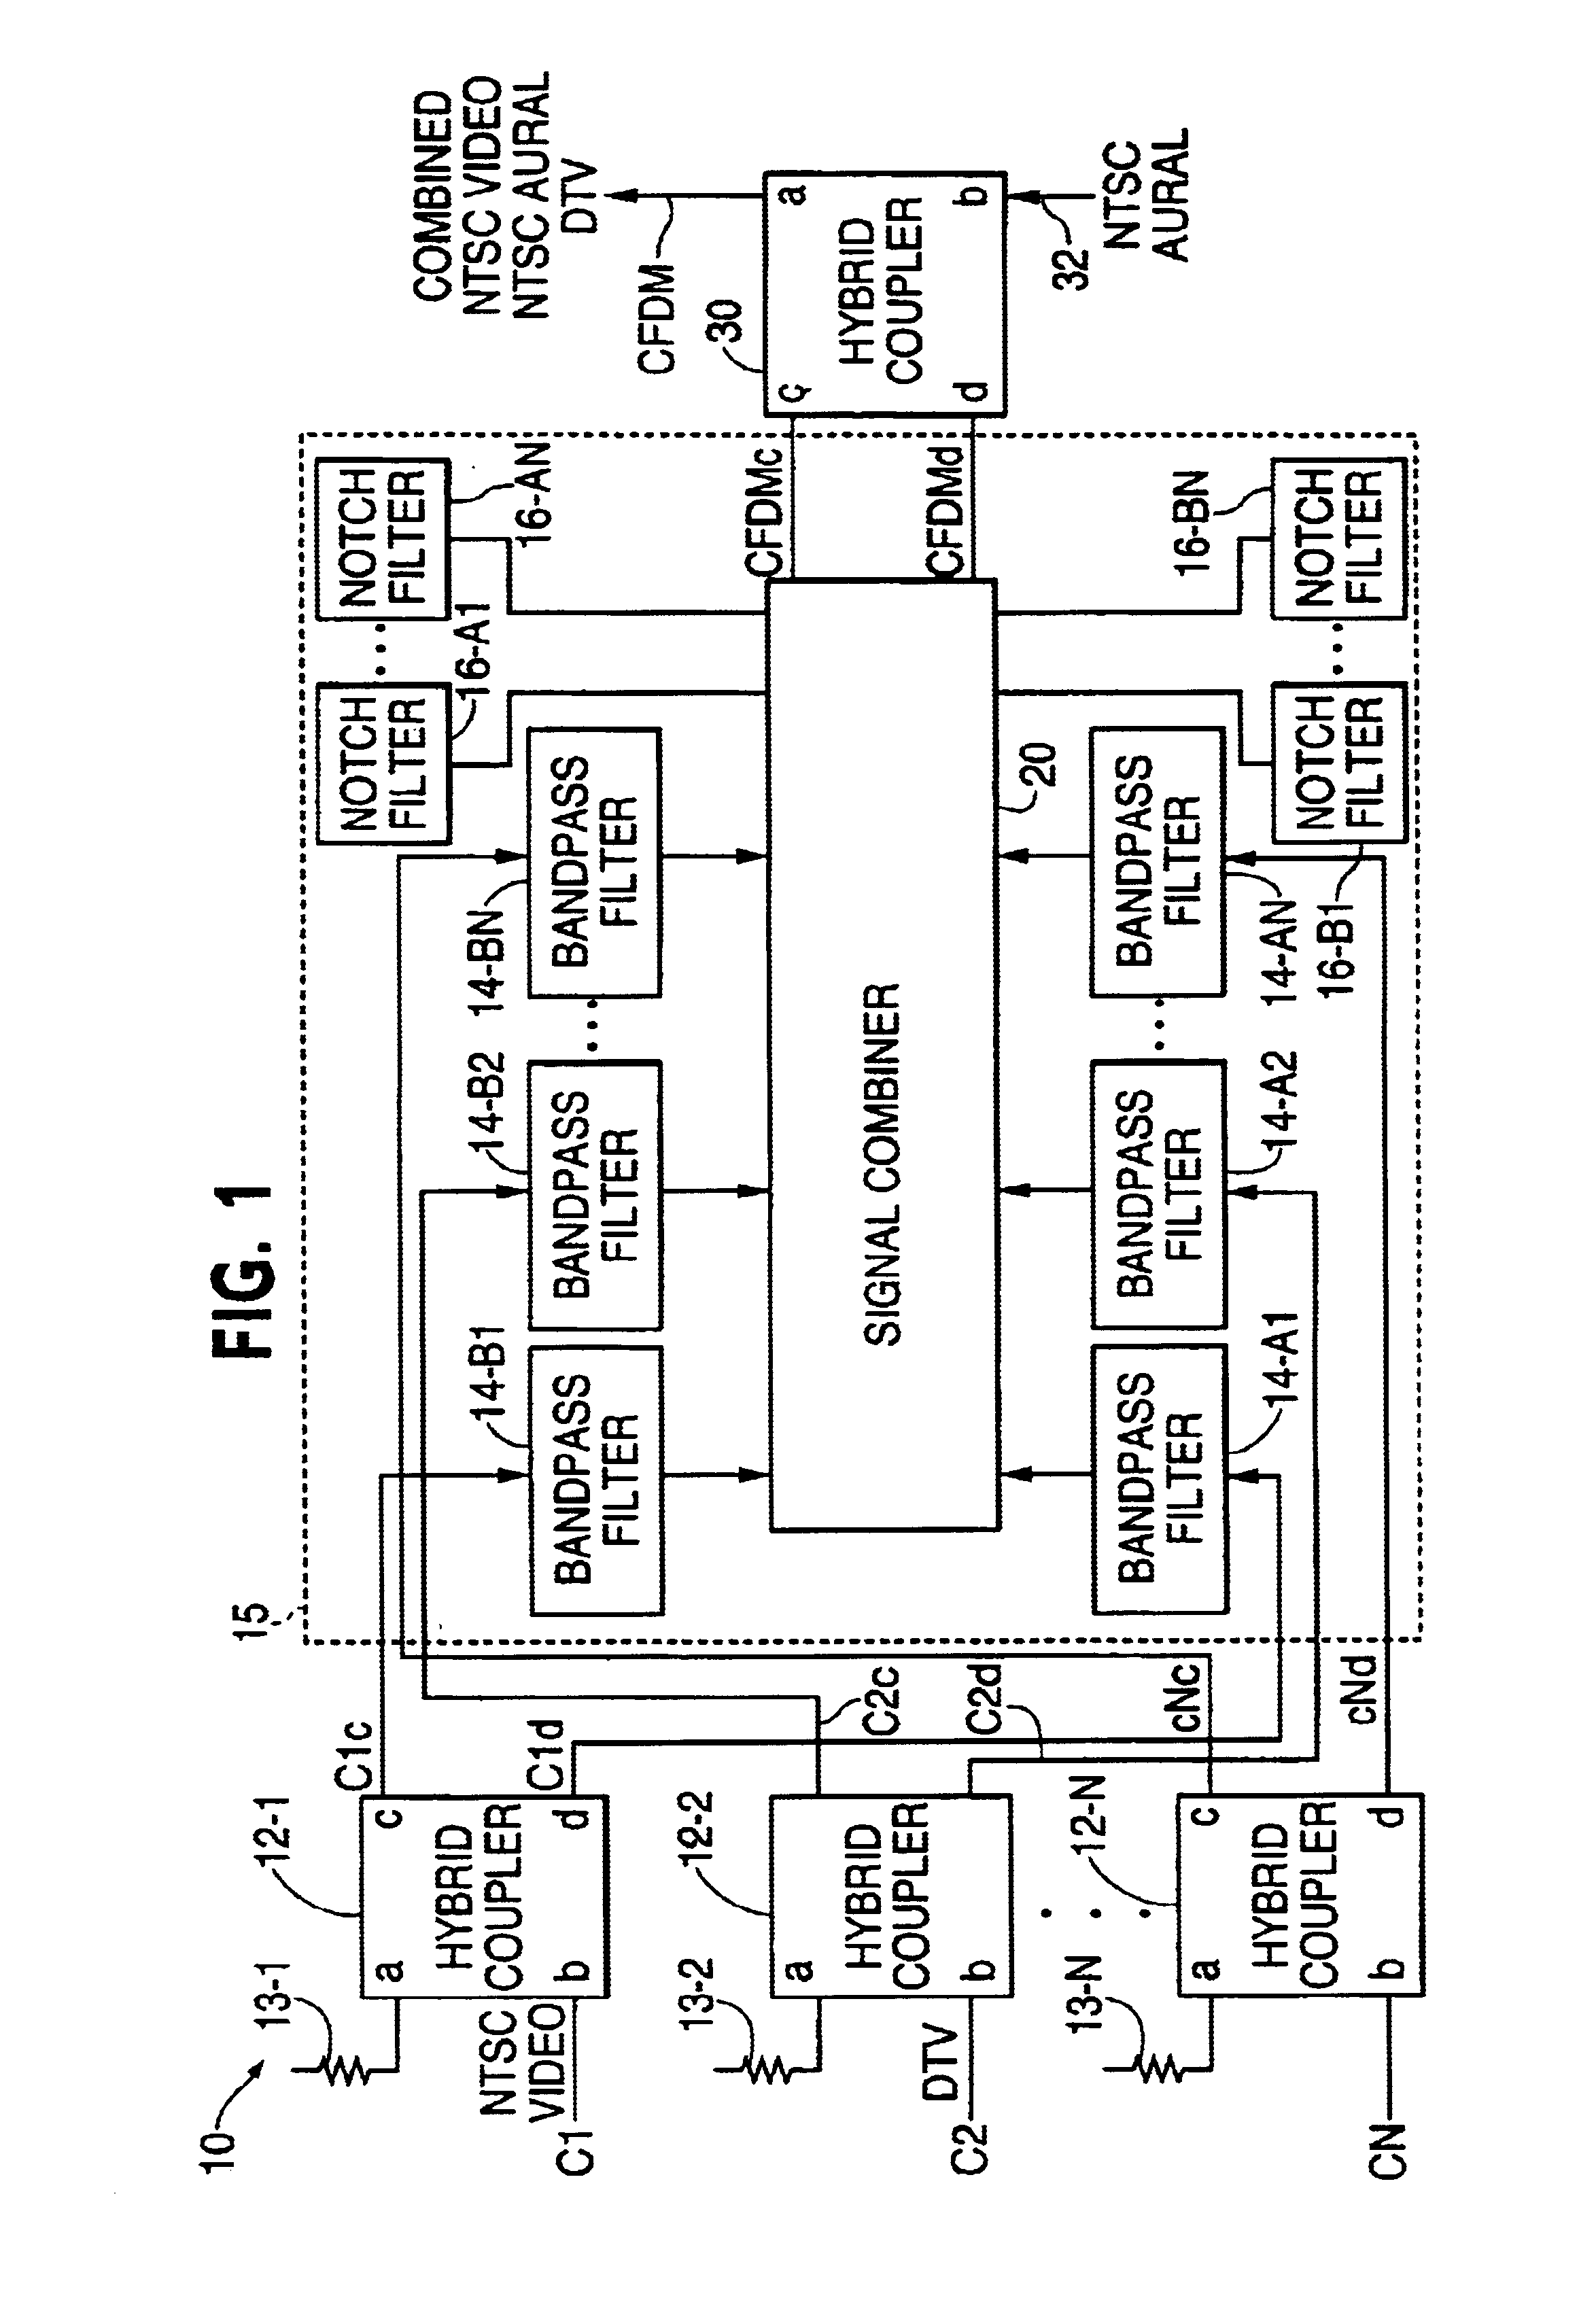 Multiplexer for adjacent NTSC and DTV channels